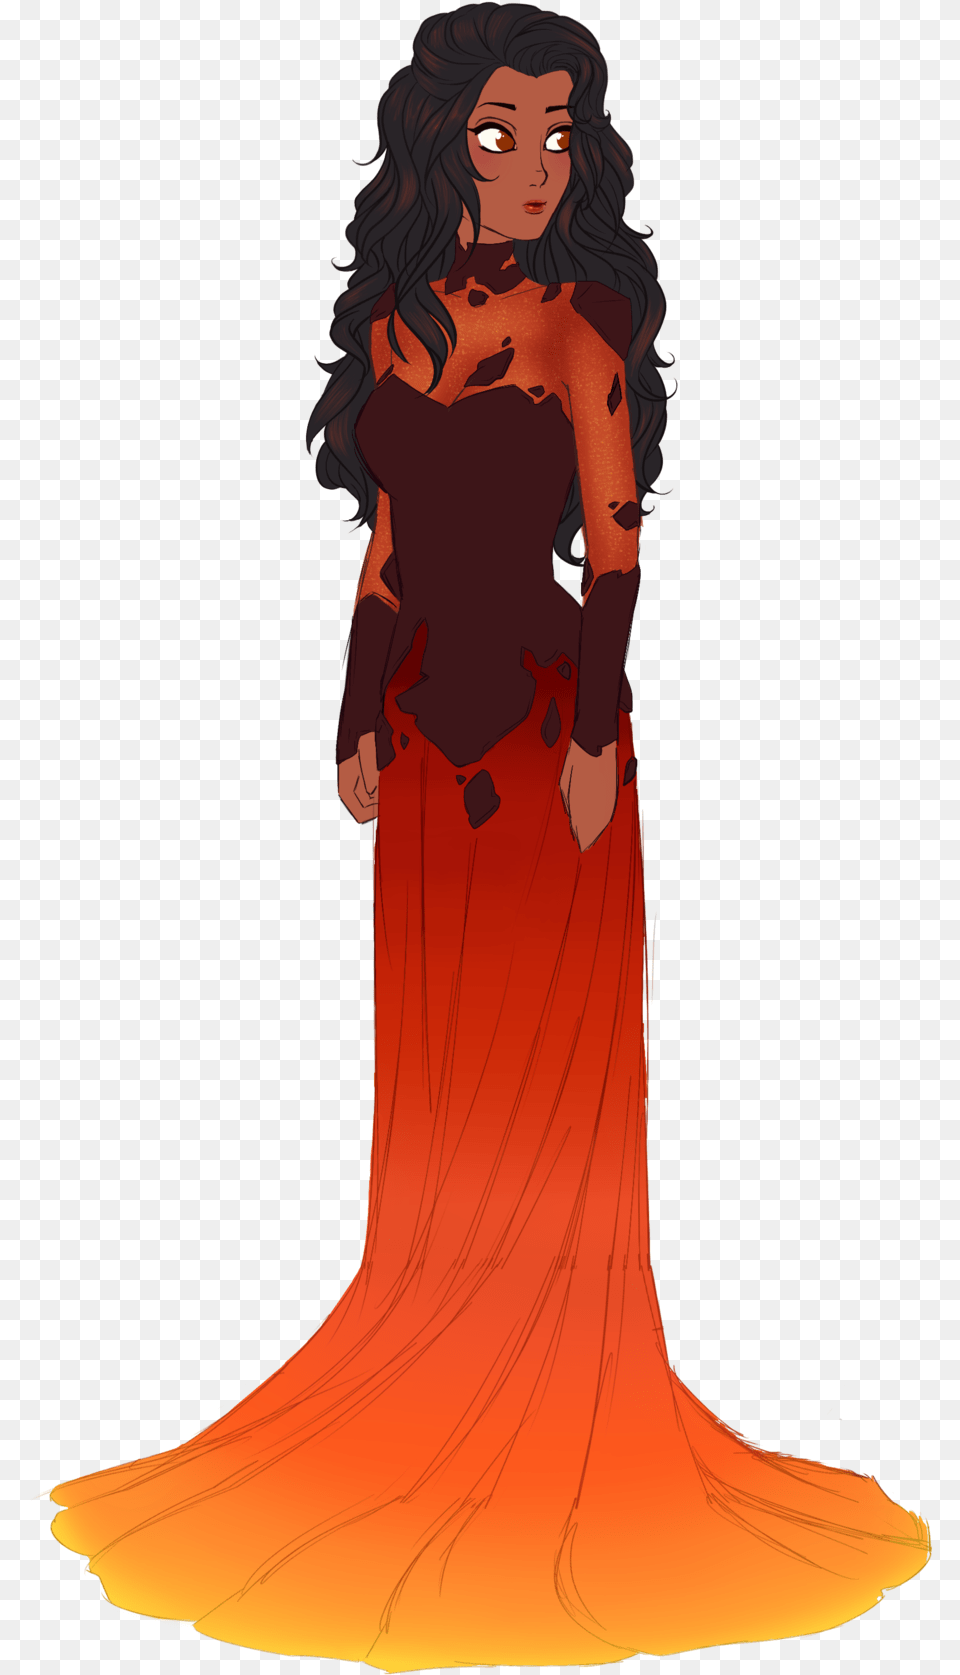 Fire Elsa By Choukolina Sharkboy And Lavagirl Fanart, Formal Wear, Clothing, Dress, Gown Png Image